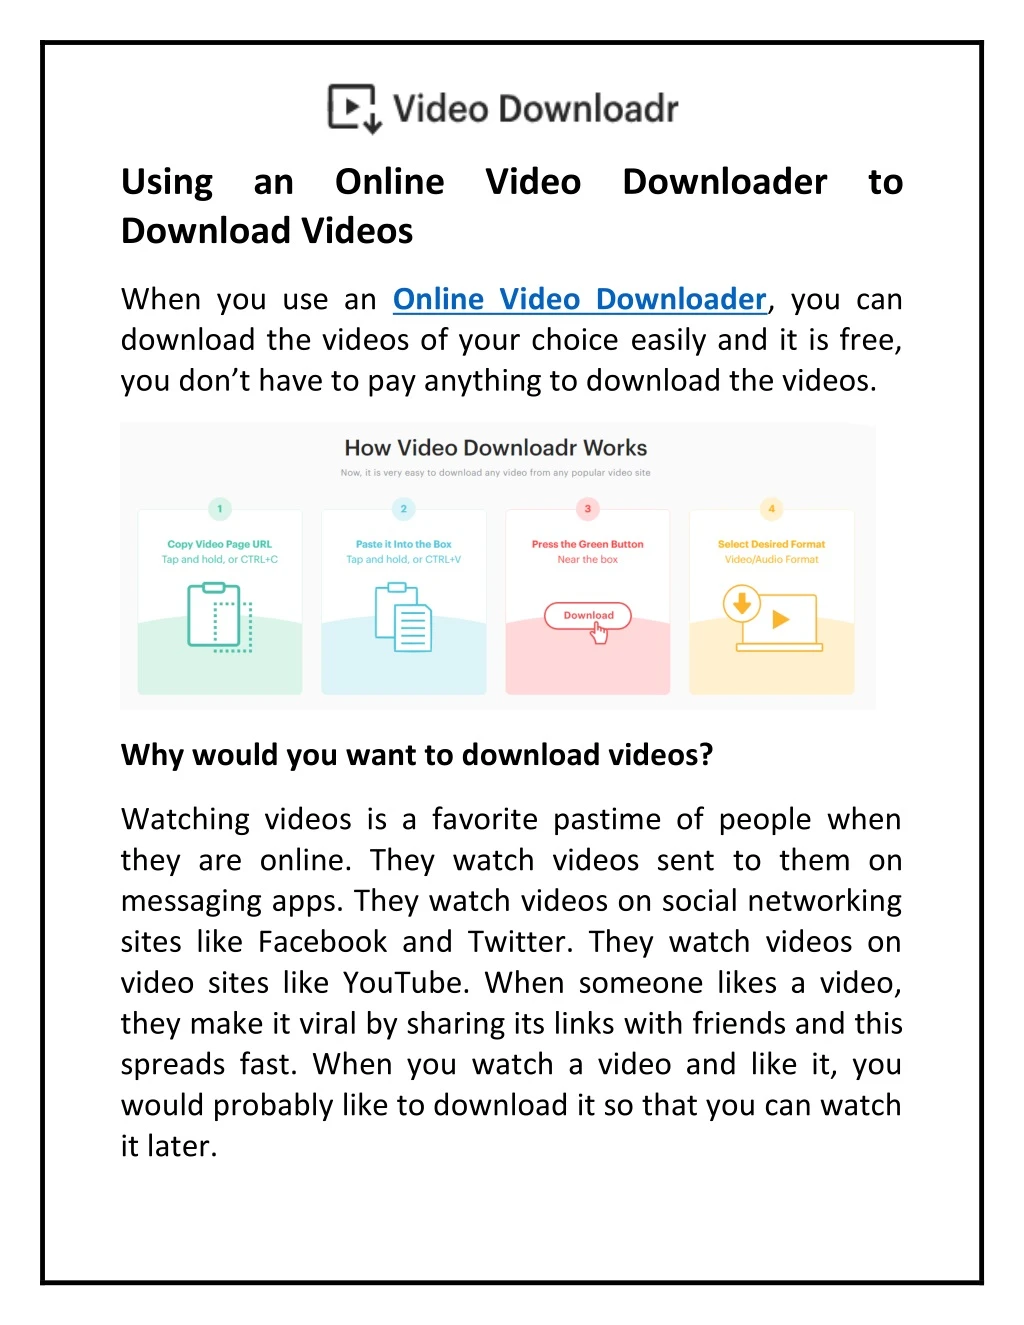 using an online video downloader to download